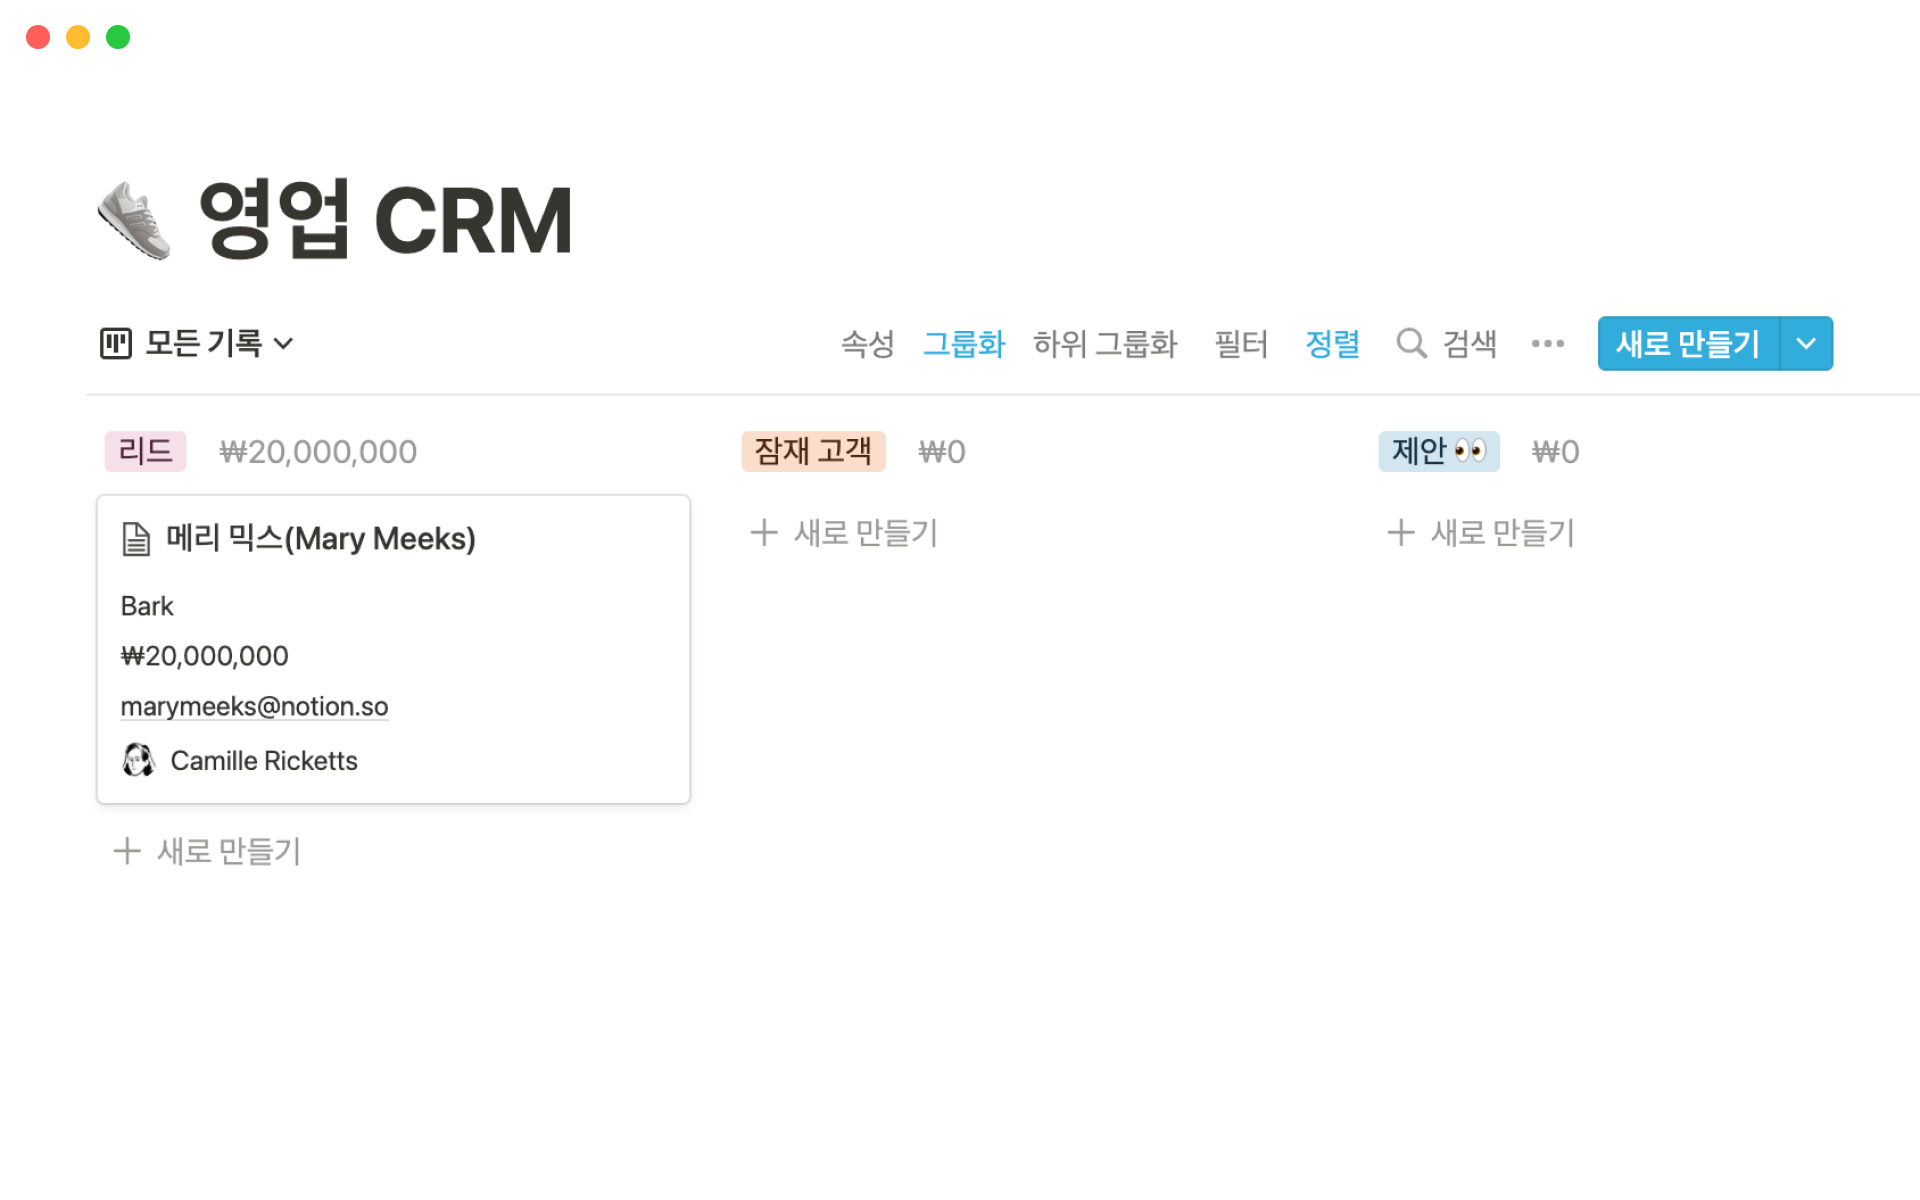 The desktop image for the Sales CRM template